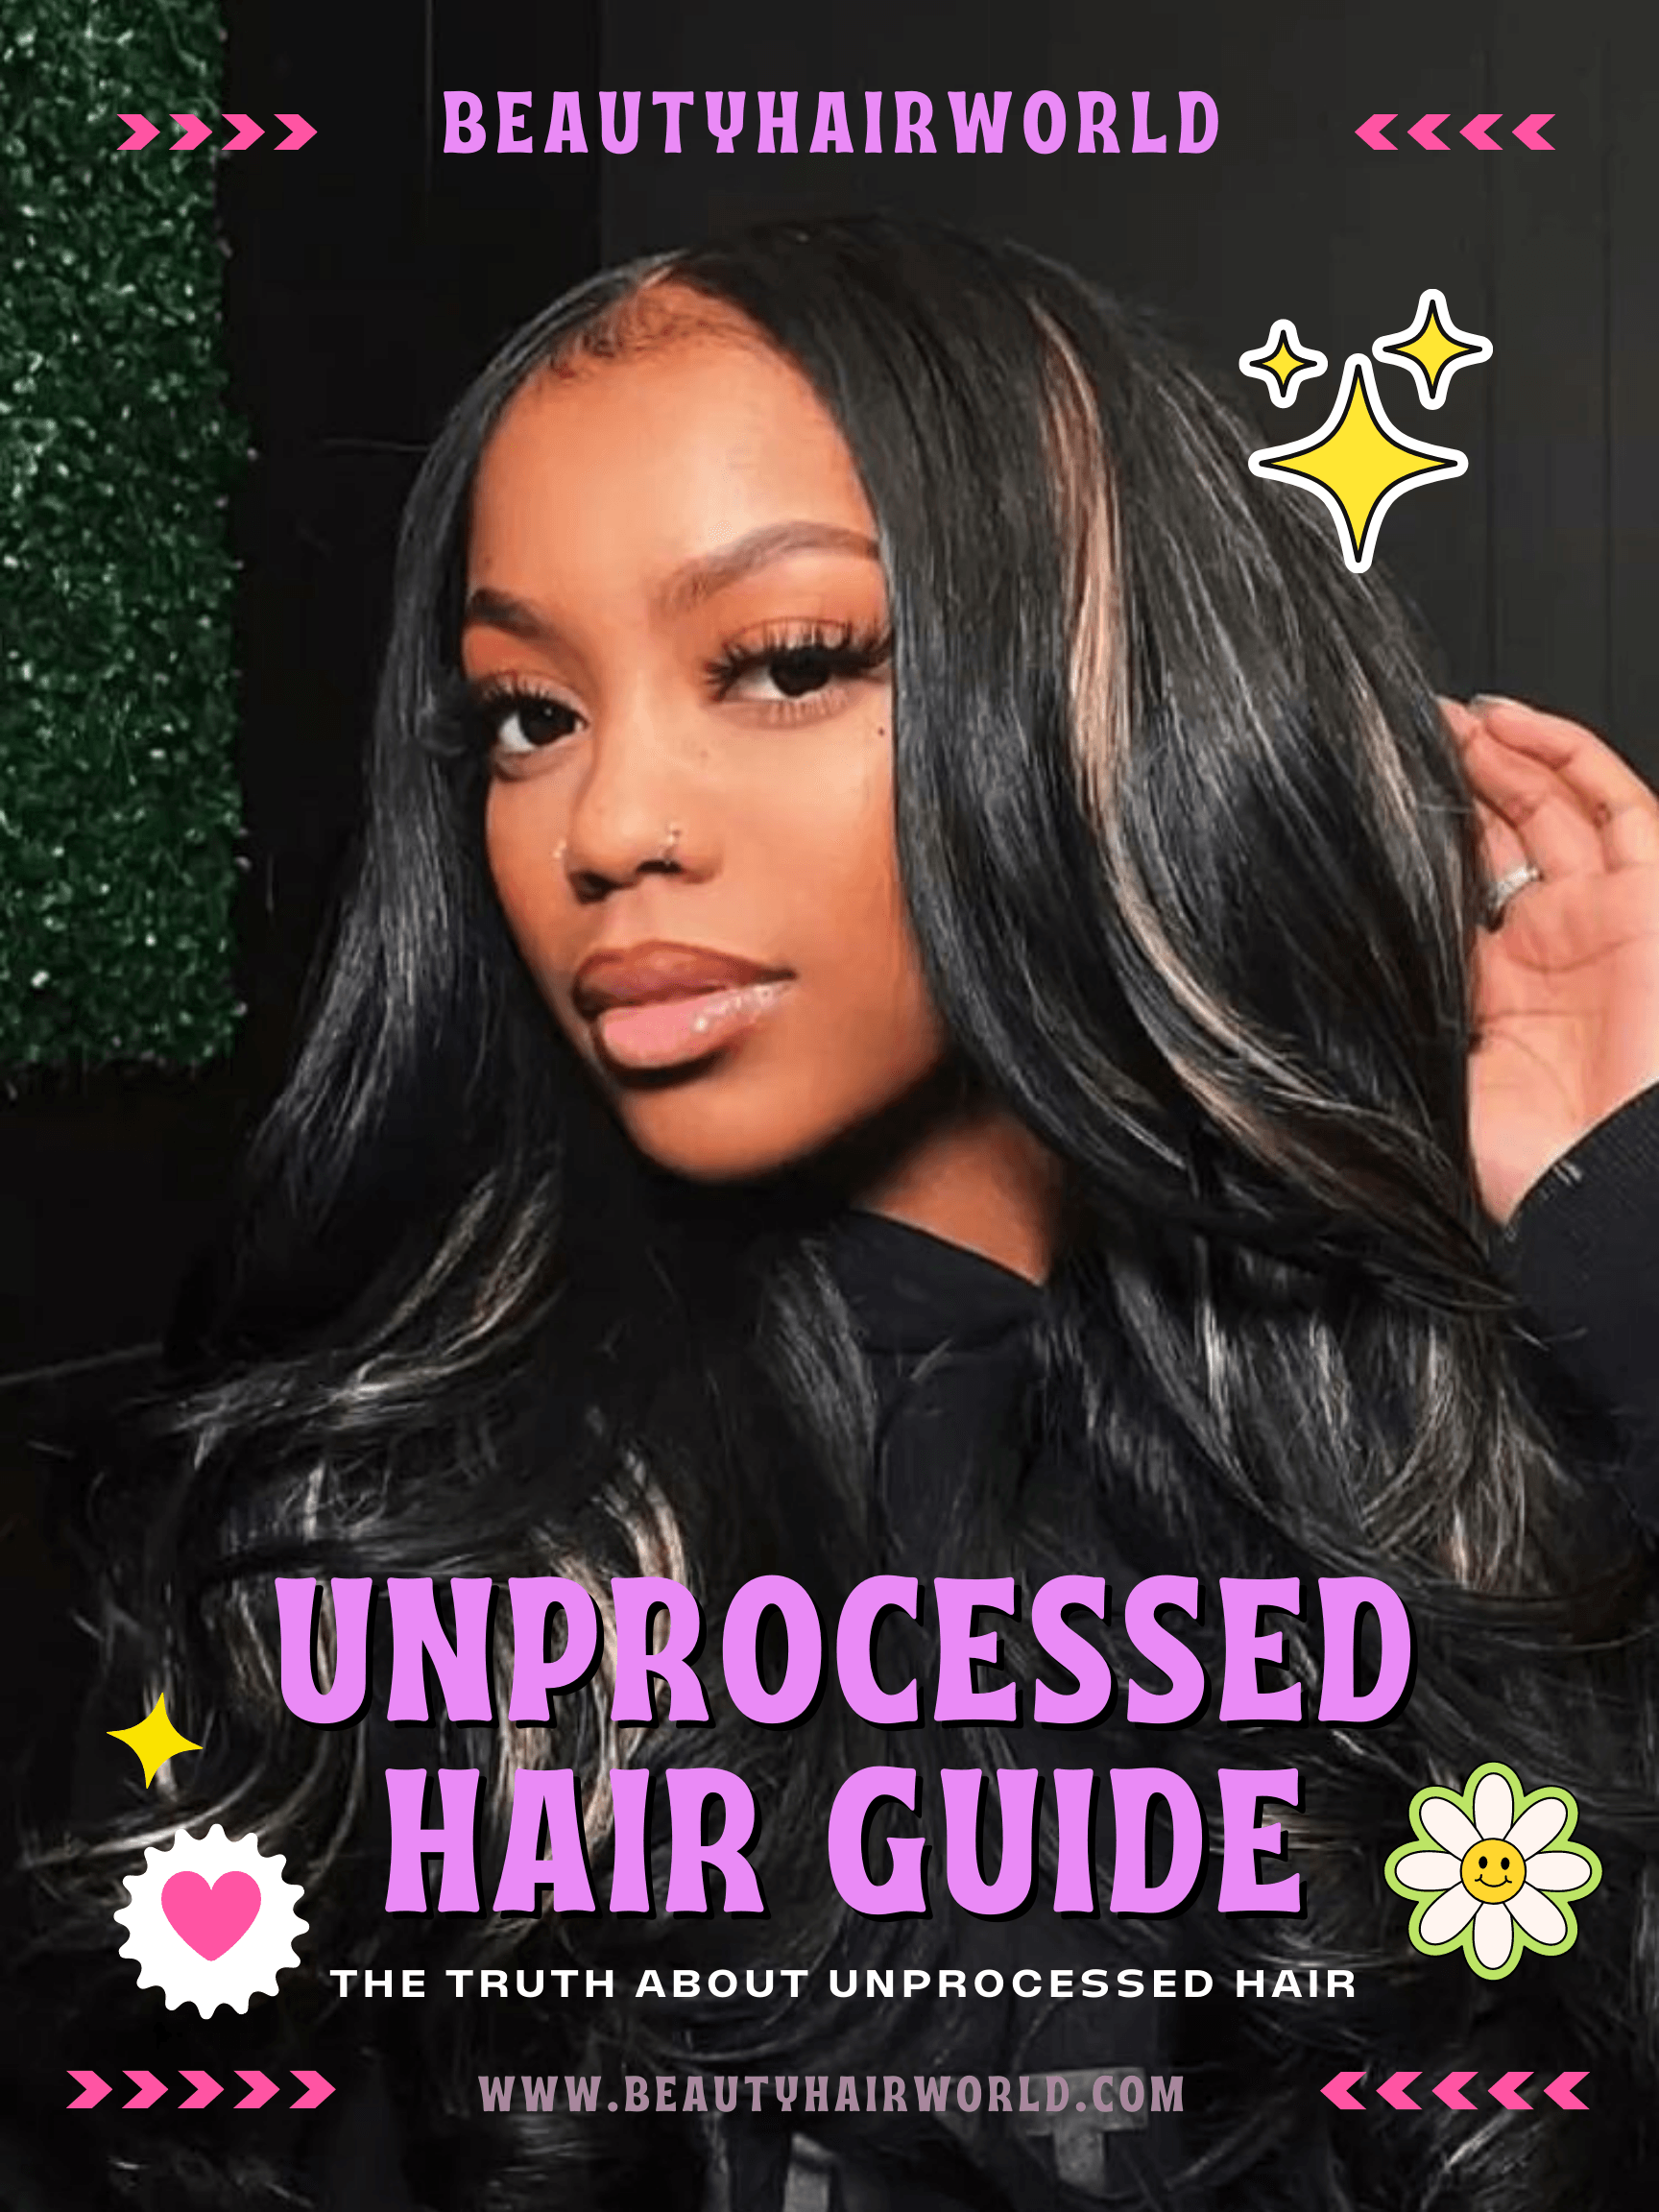 THE TRUTH ABOUT UNPROCESSED HAIR - BeautyHairWorld